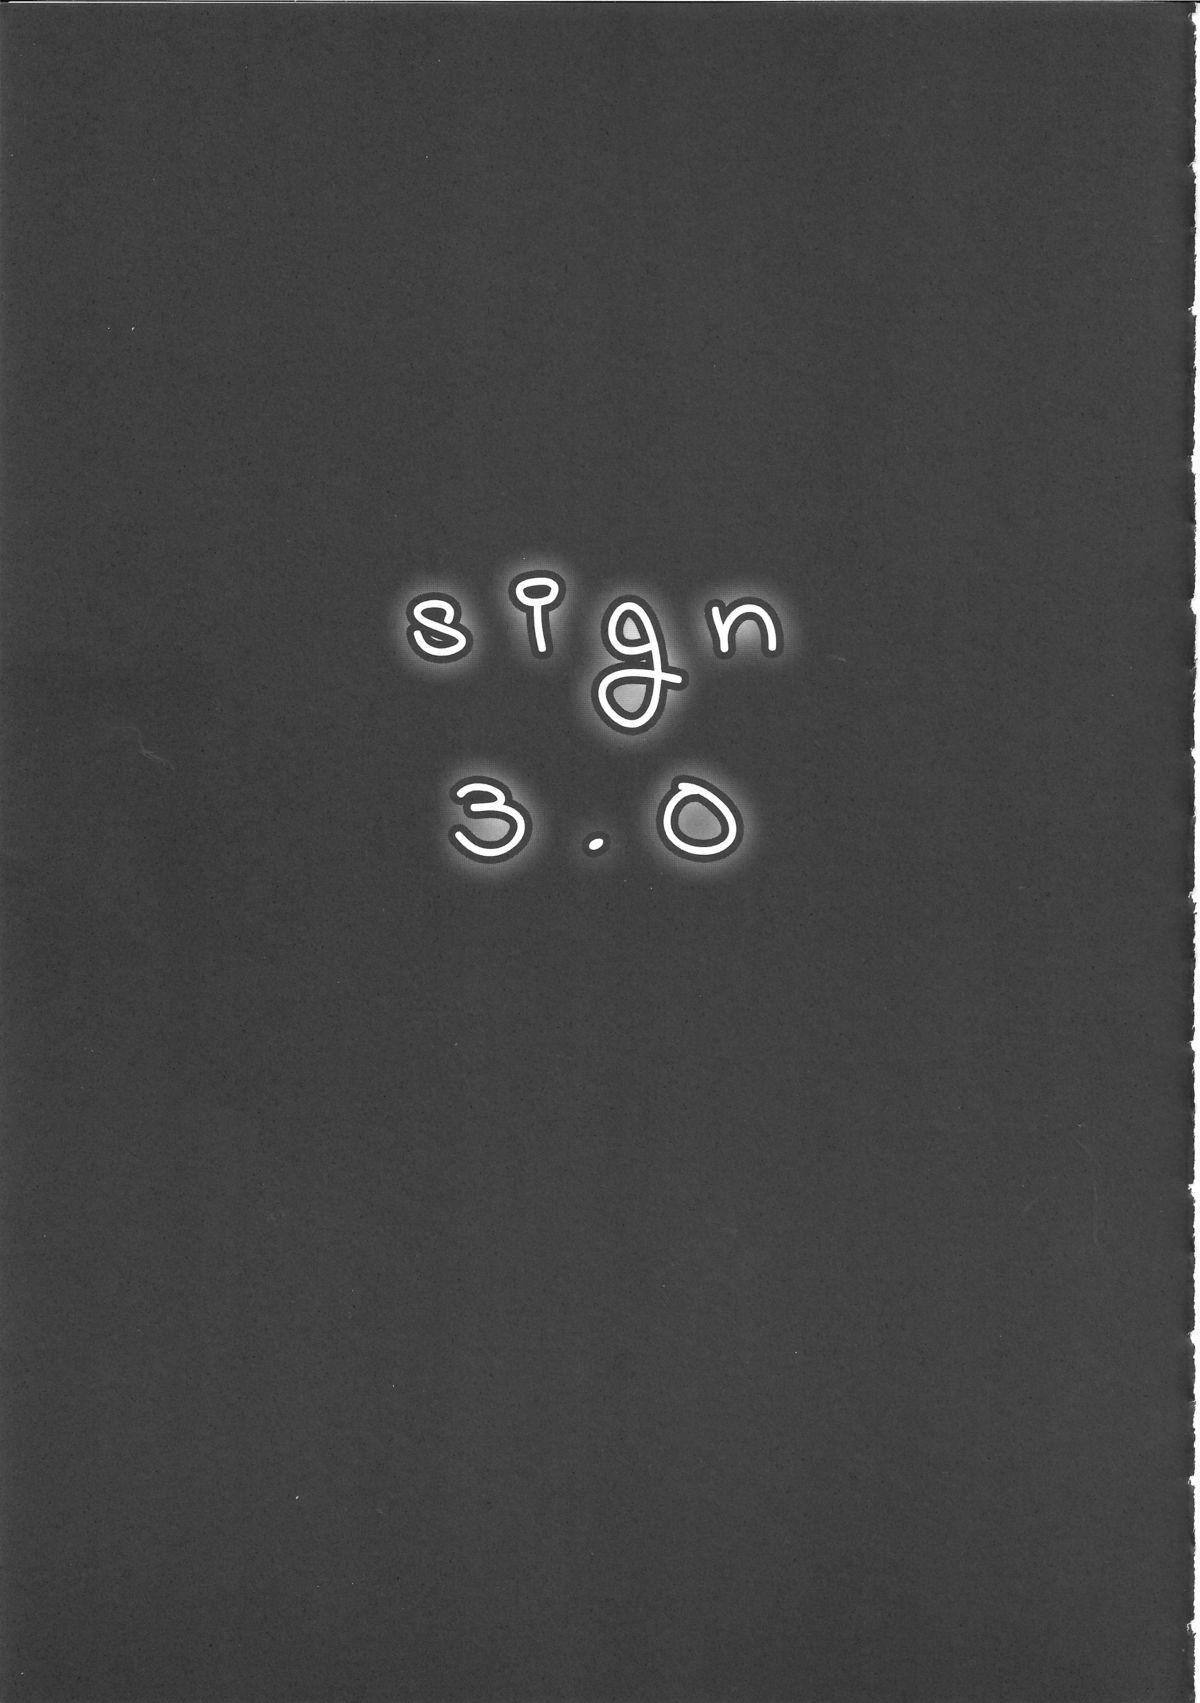 sign 3.0 19